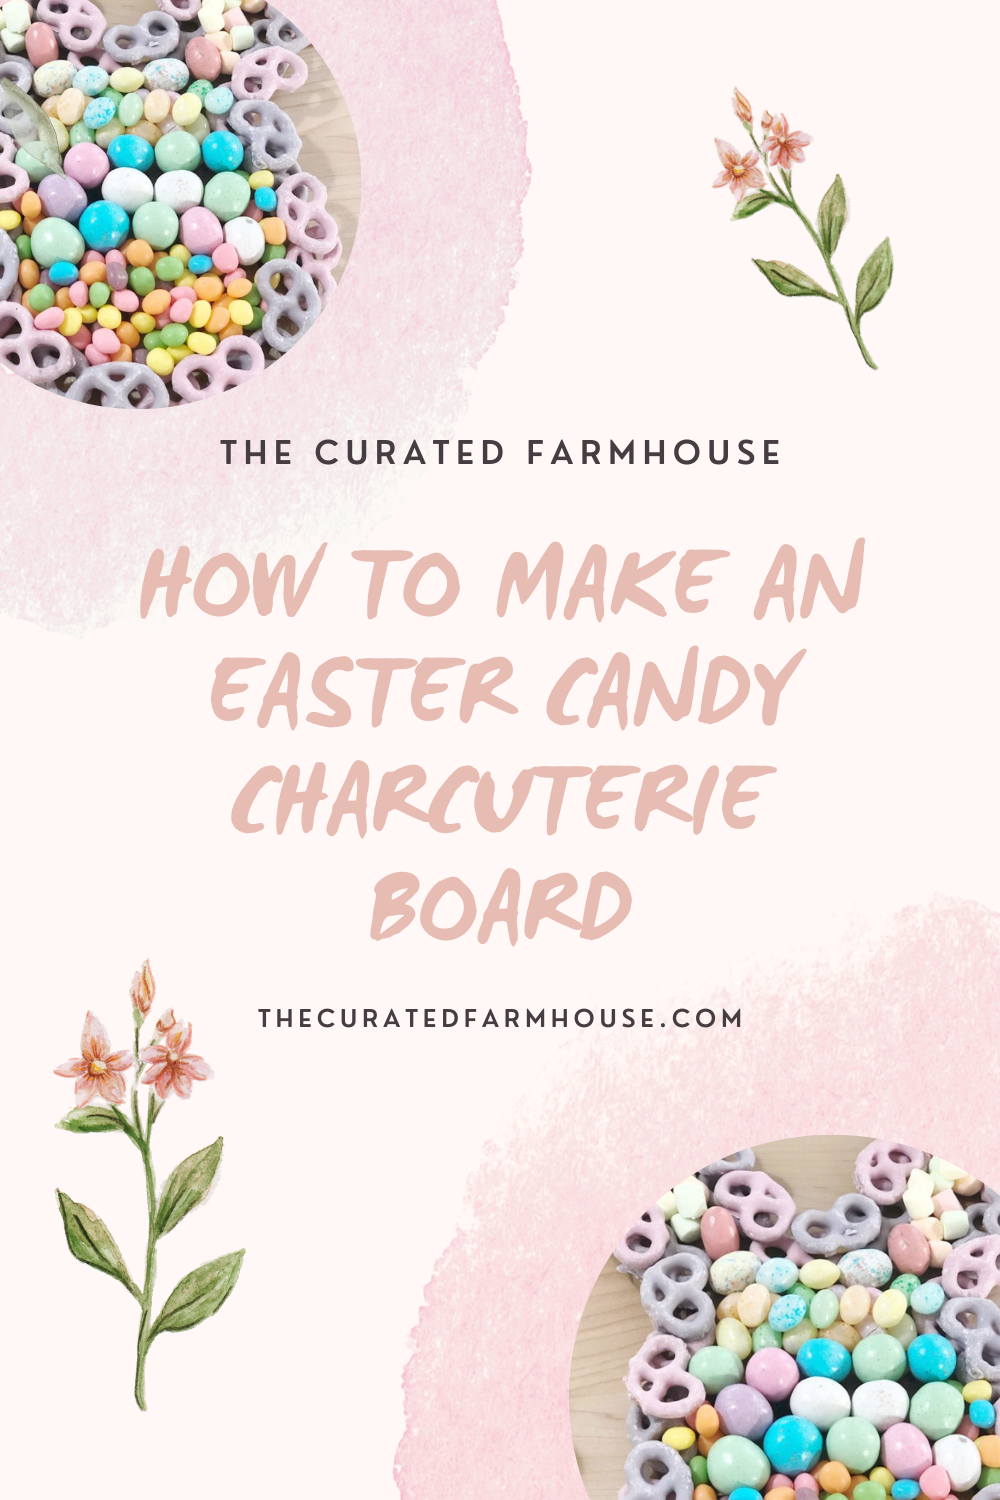 How to Make an Easter Candy Charcuterie Board